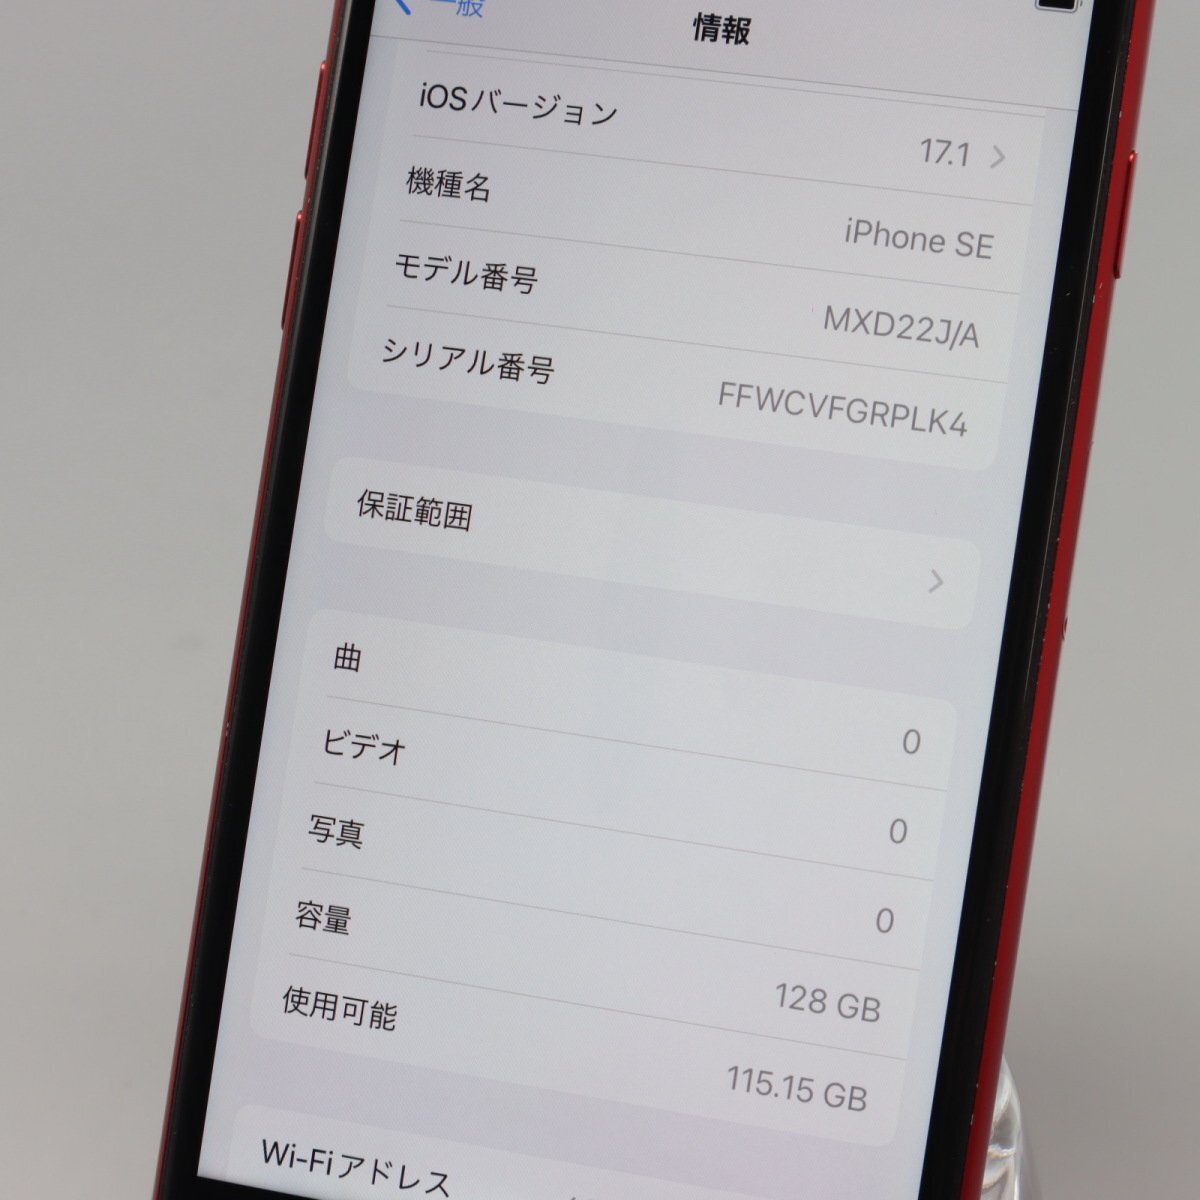 Apple iPhoneSE 128GB (第2世代) (PRODUCT)RED A2296 MXD22J/A バッテリ81% ■ソフトバンク★Joshin5256【1円開始・送料無料】_画像3